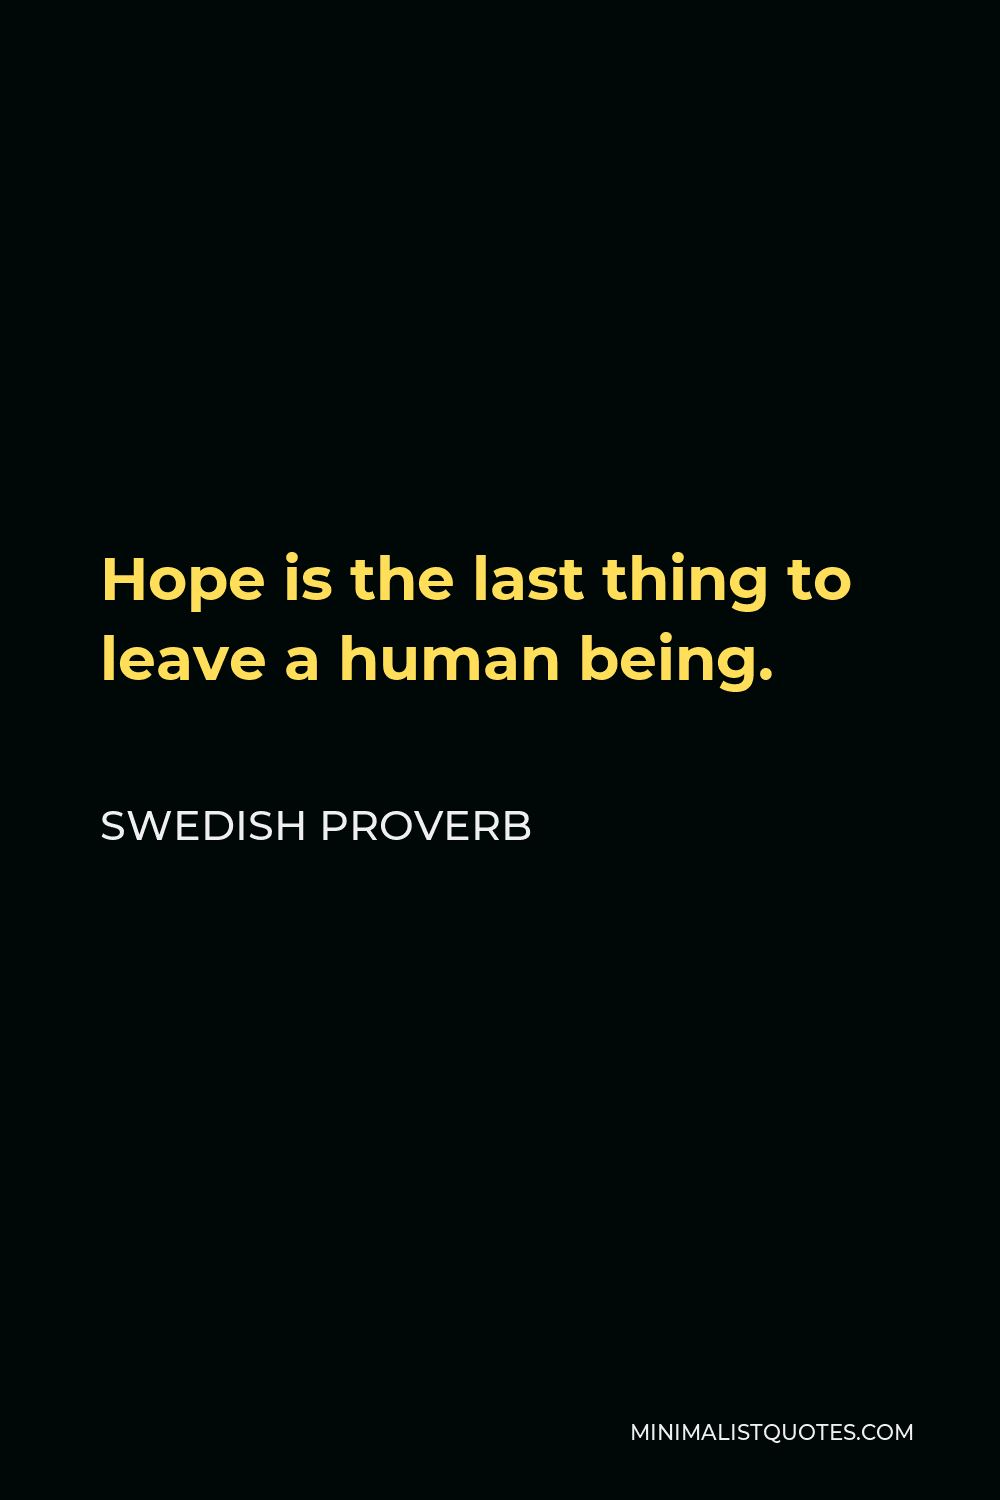 Swedish Proverb Quote - Hope is the last thing to leave a human being.